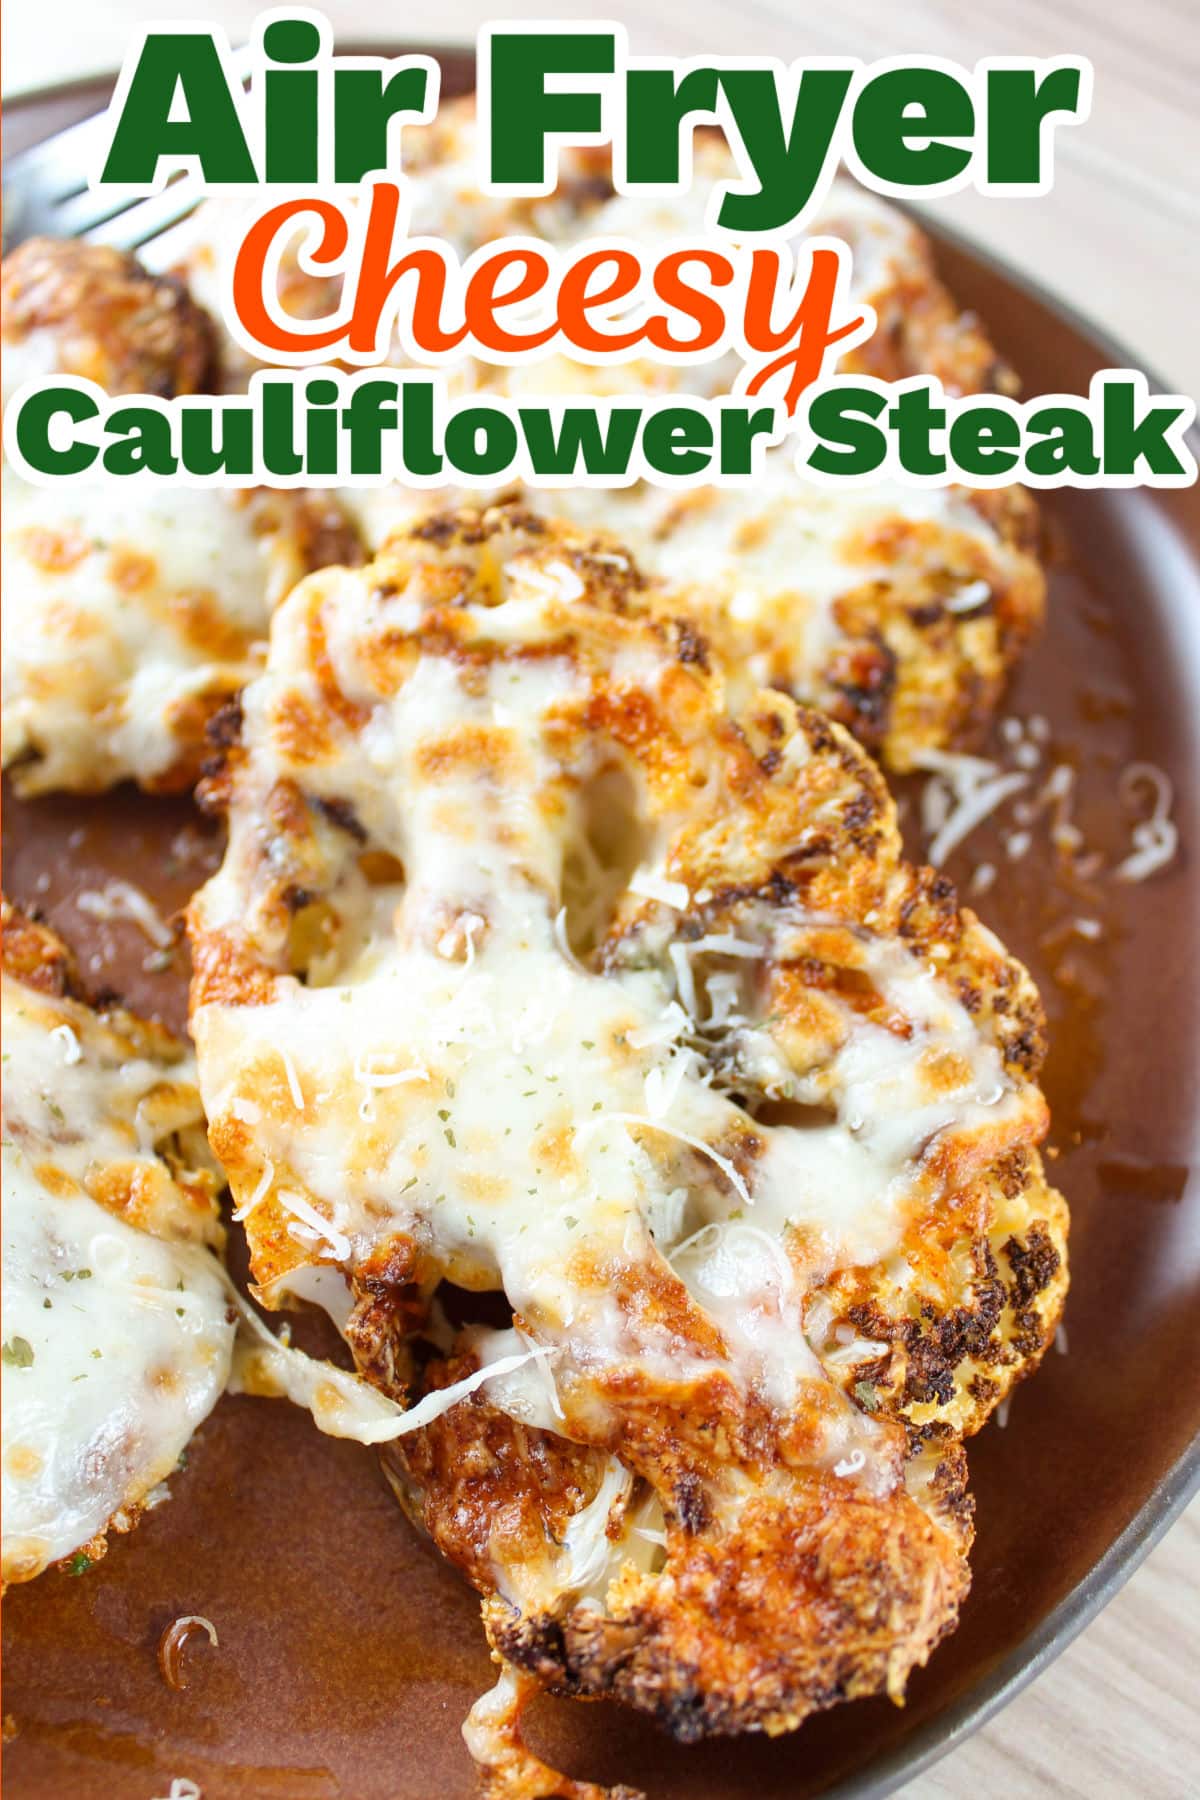 These Cheesy Cauliflower Steaks in the Air Fryer are so simple and really jazz up plain old cauliflower into a main dish everybody will enjoy! What a delicious low-carb meal!  via @foodhussy